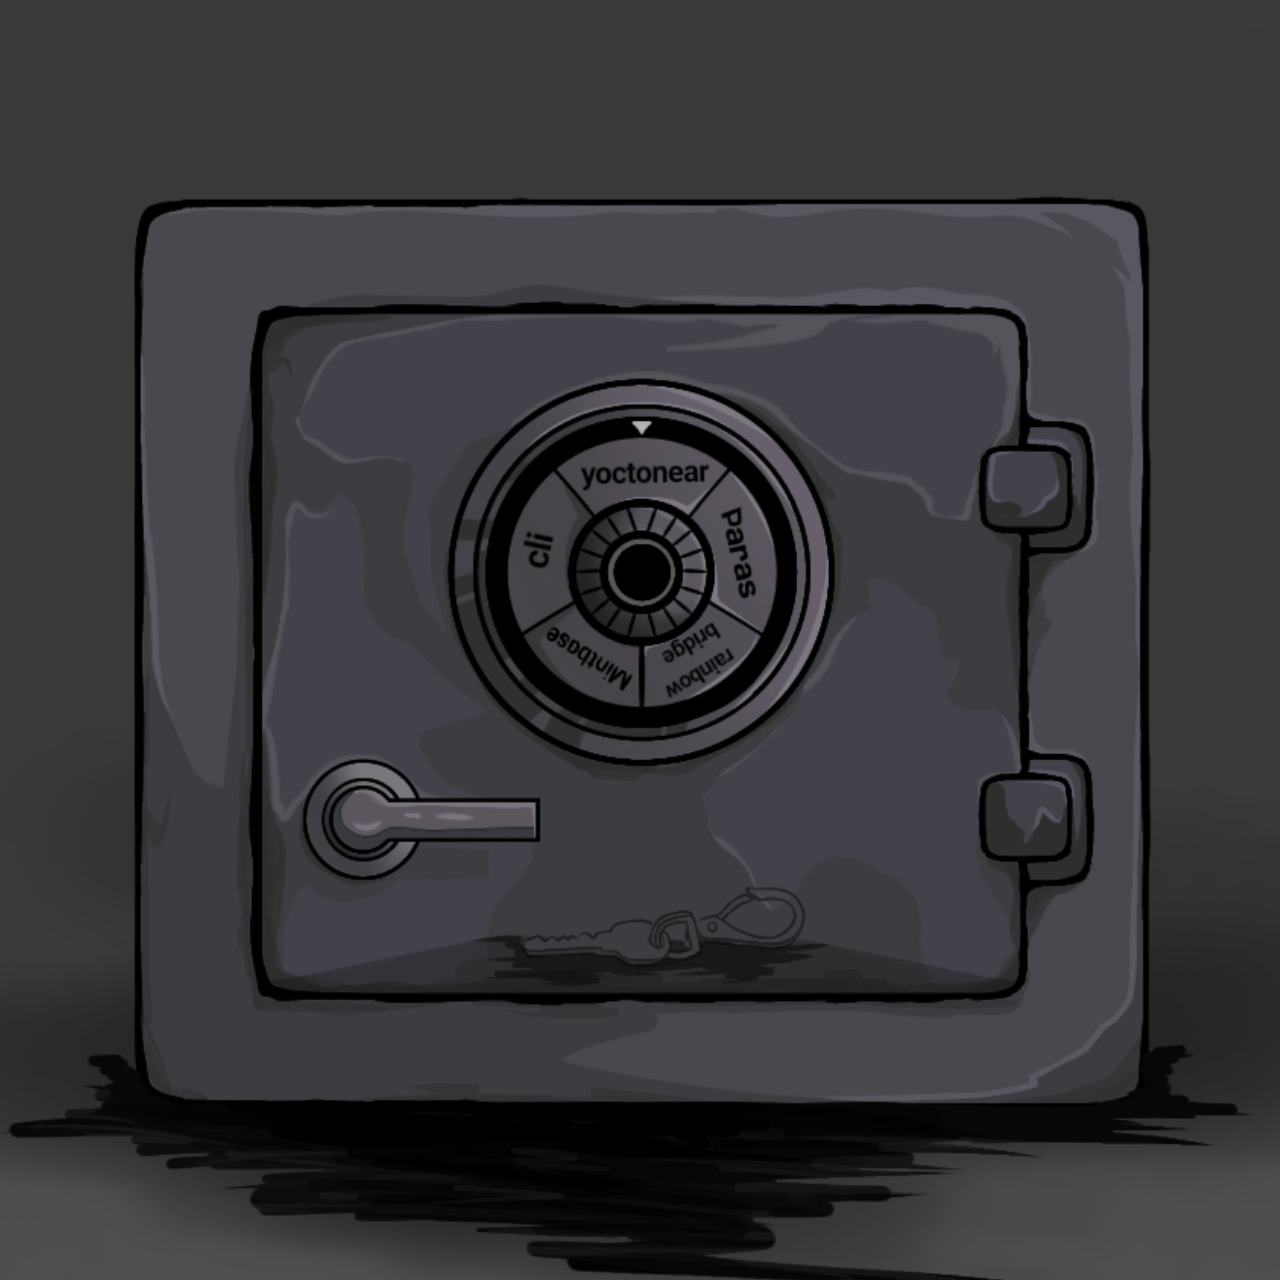 A small safe with a padlock containing words to a seed phrase, and you can see through the safe, showing it holds a function-call access key. Art created by soulless.near.